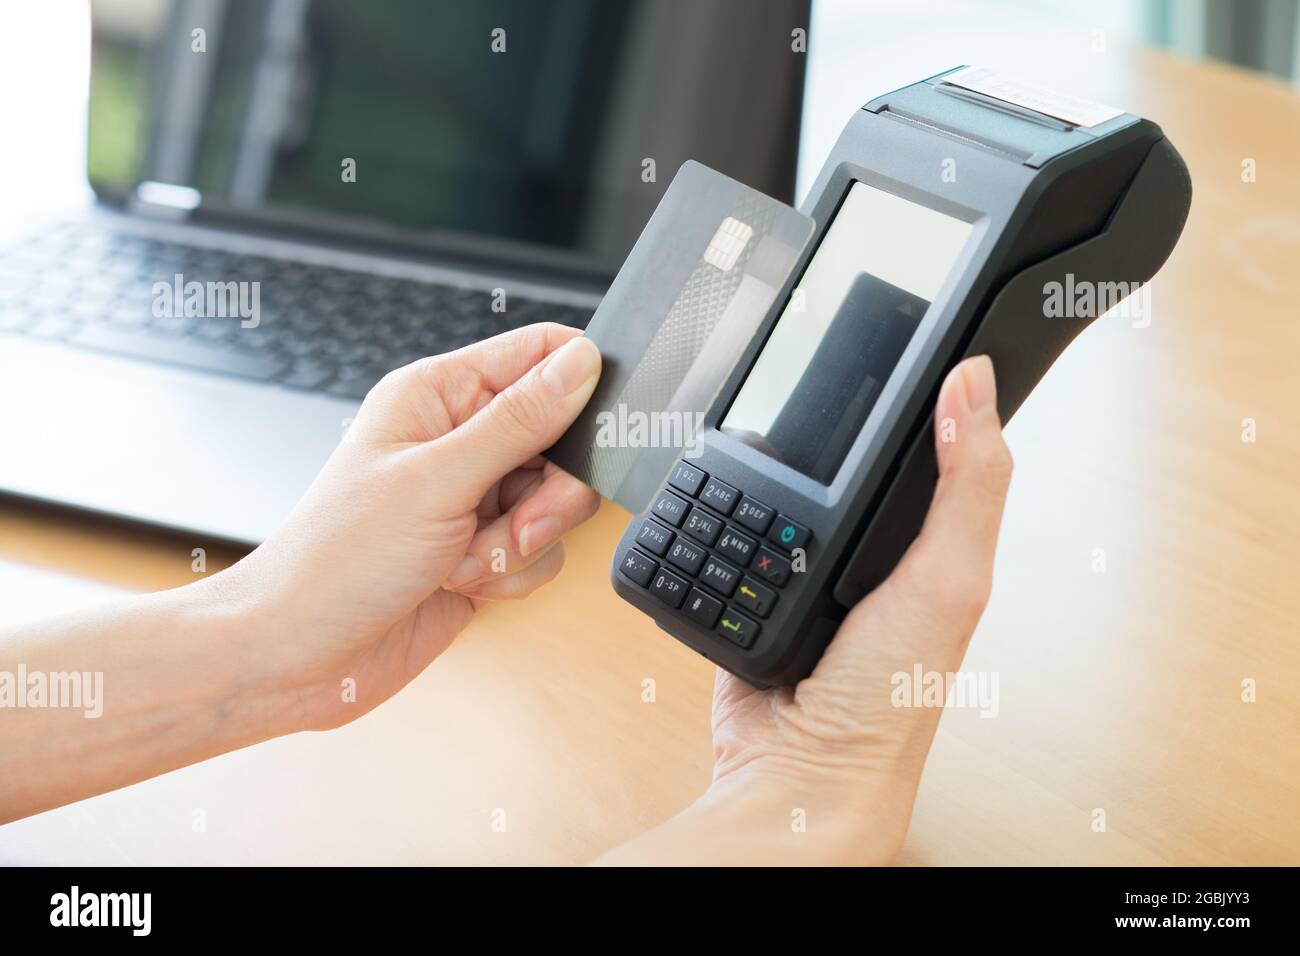 Contactless payment with credit card Stock Photo